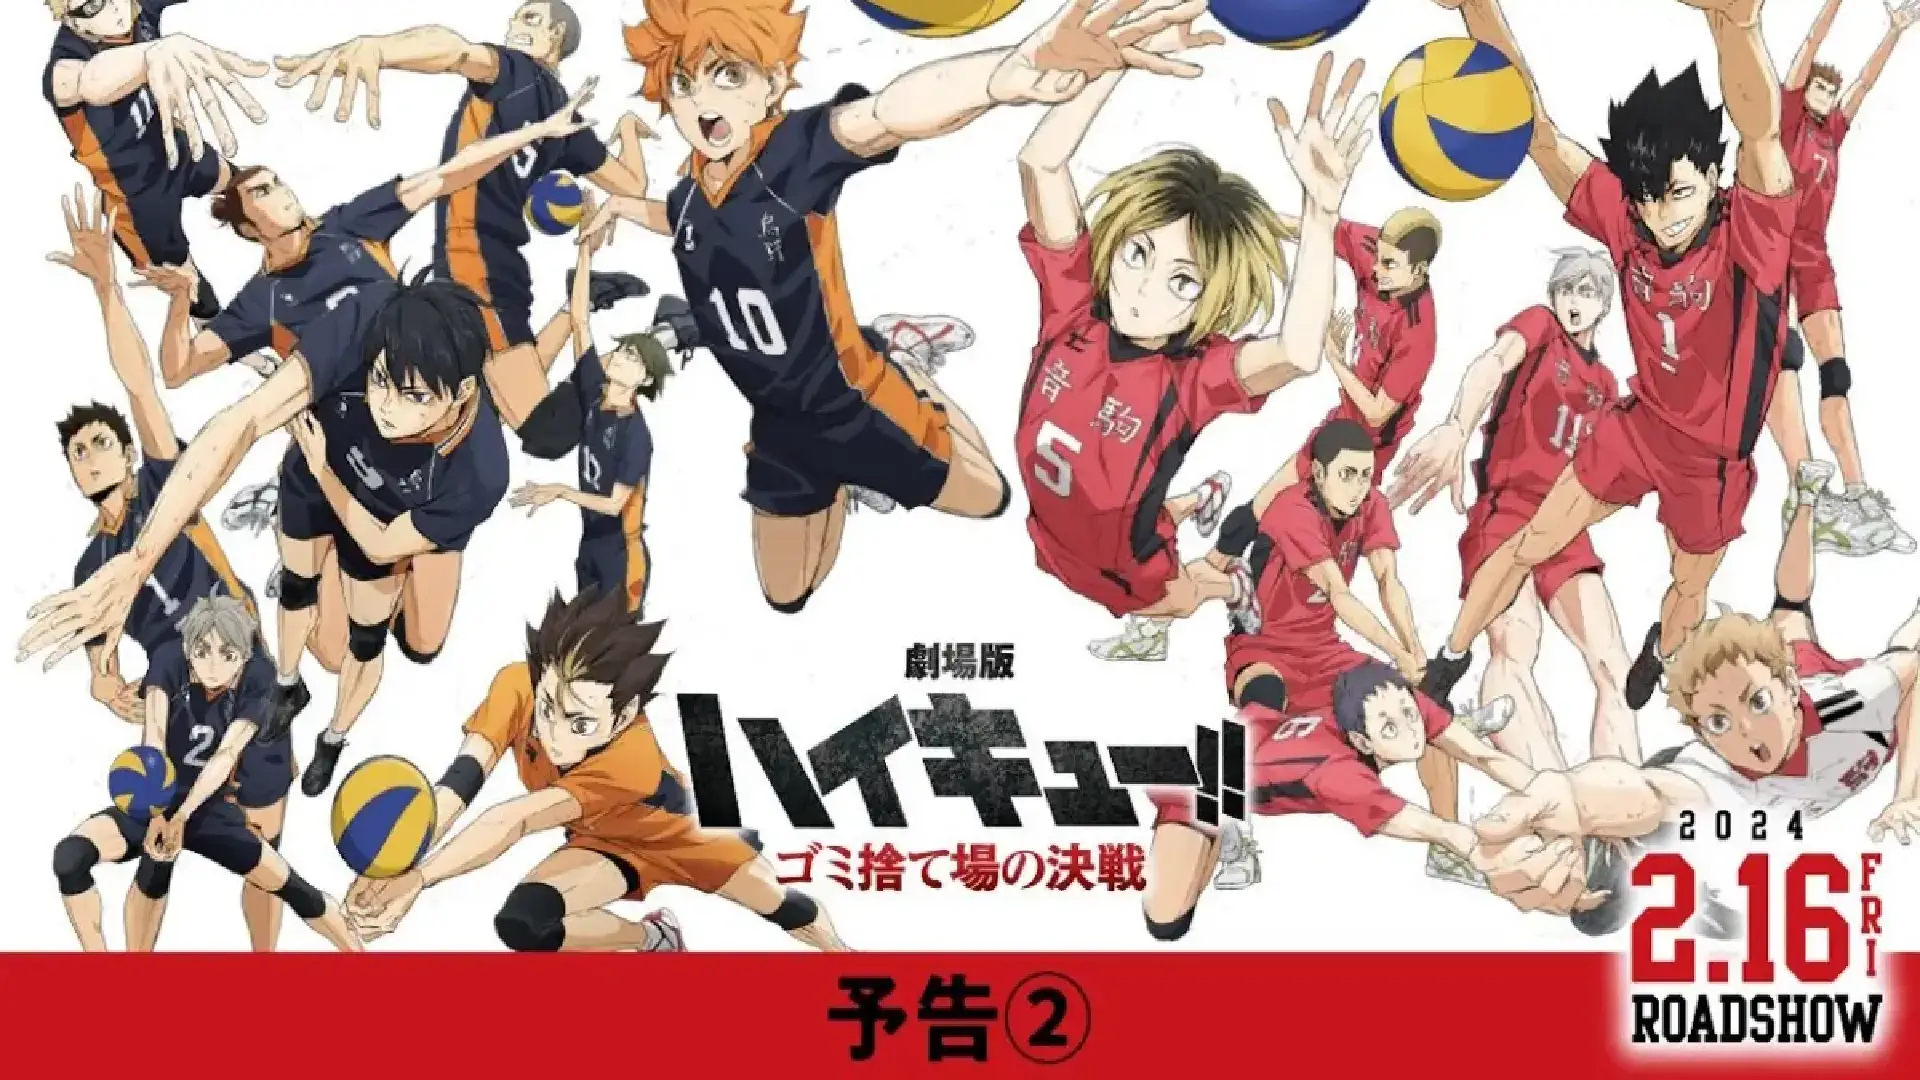 Haikyuu!! Final movie reveals theme song and new trailer at Jump